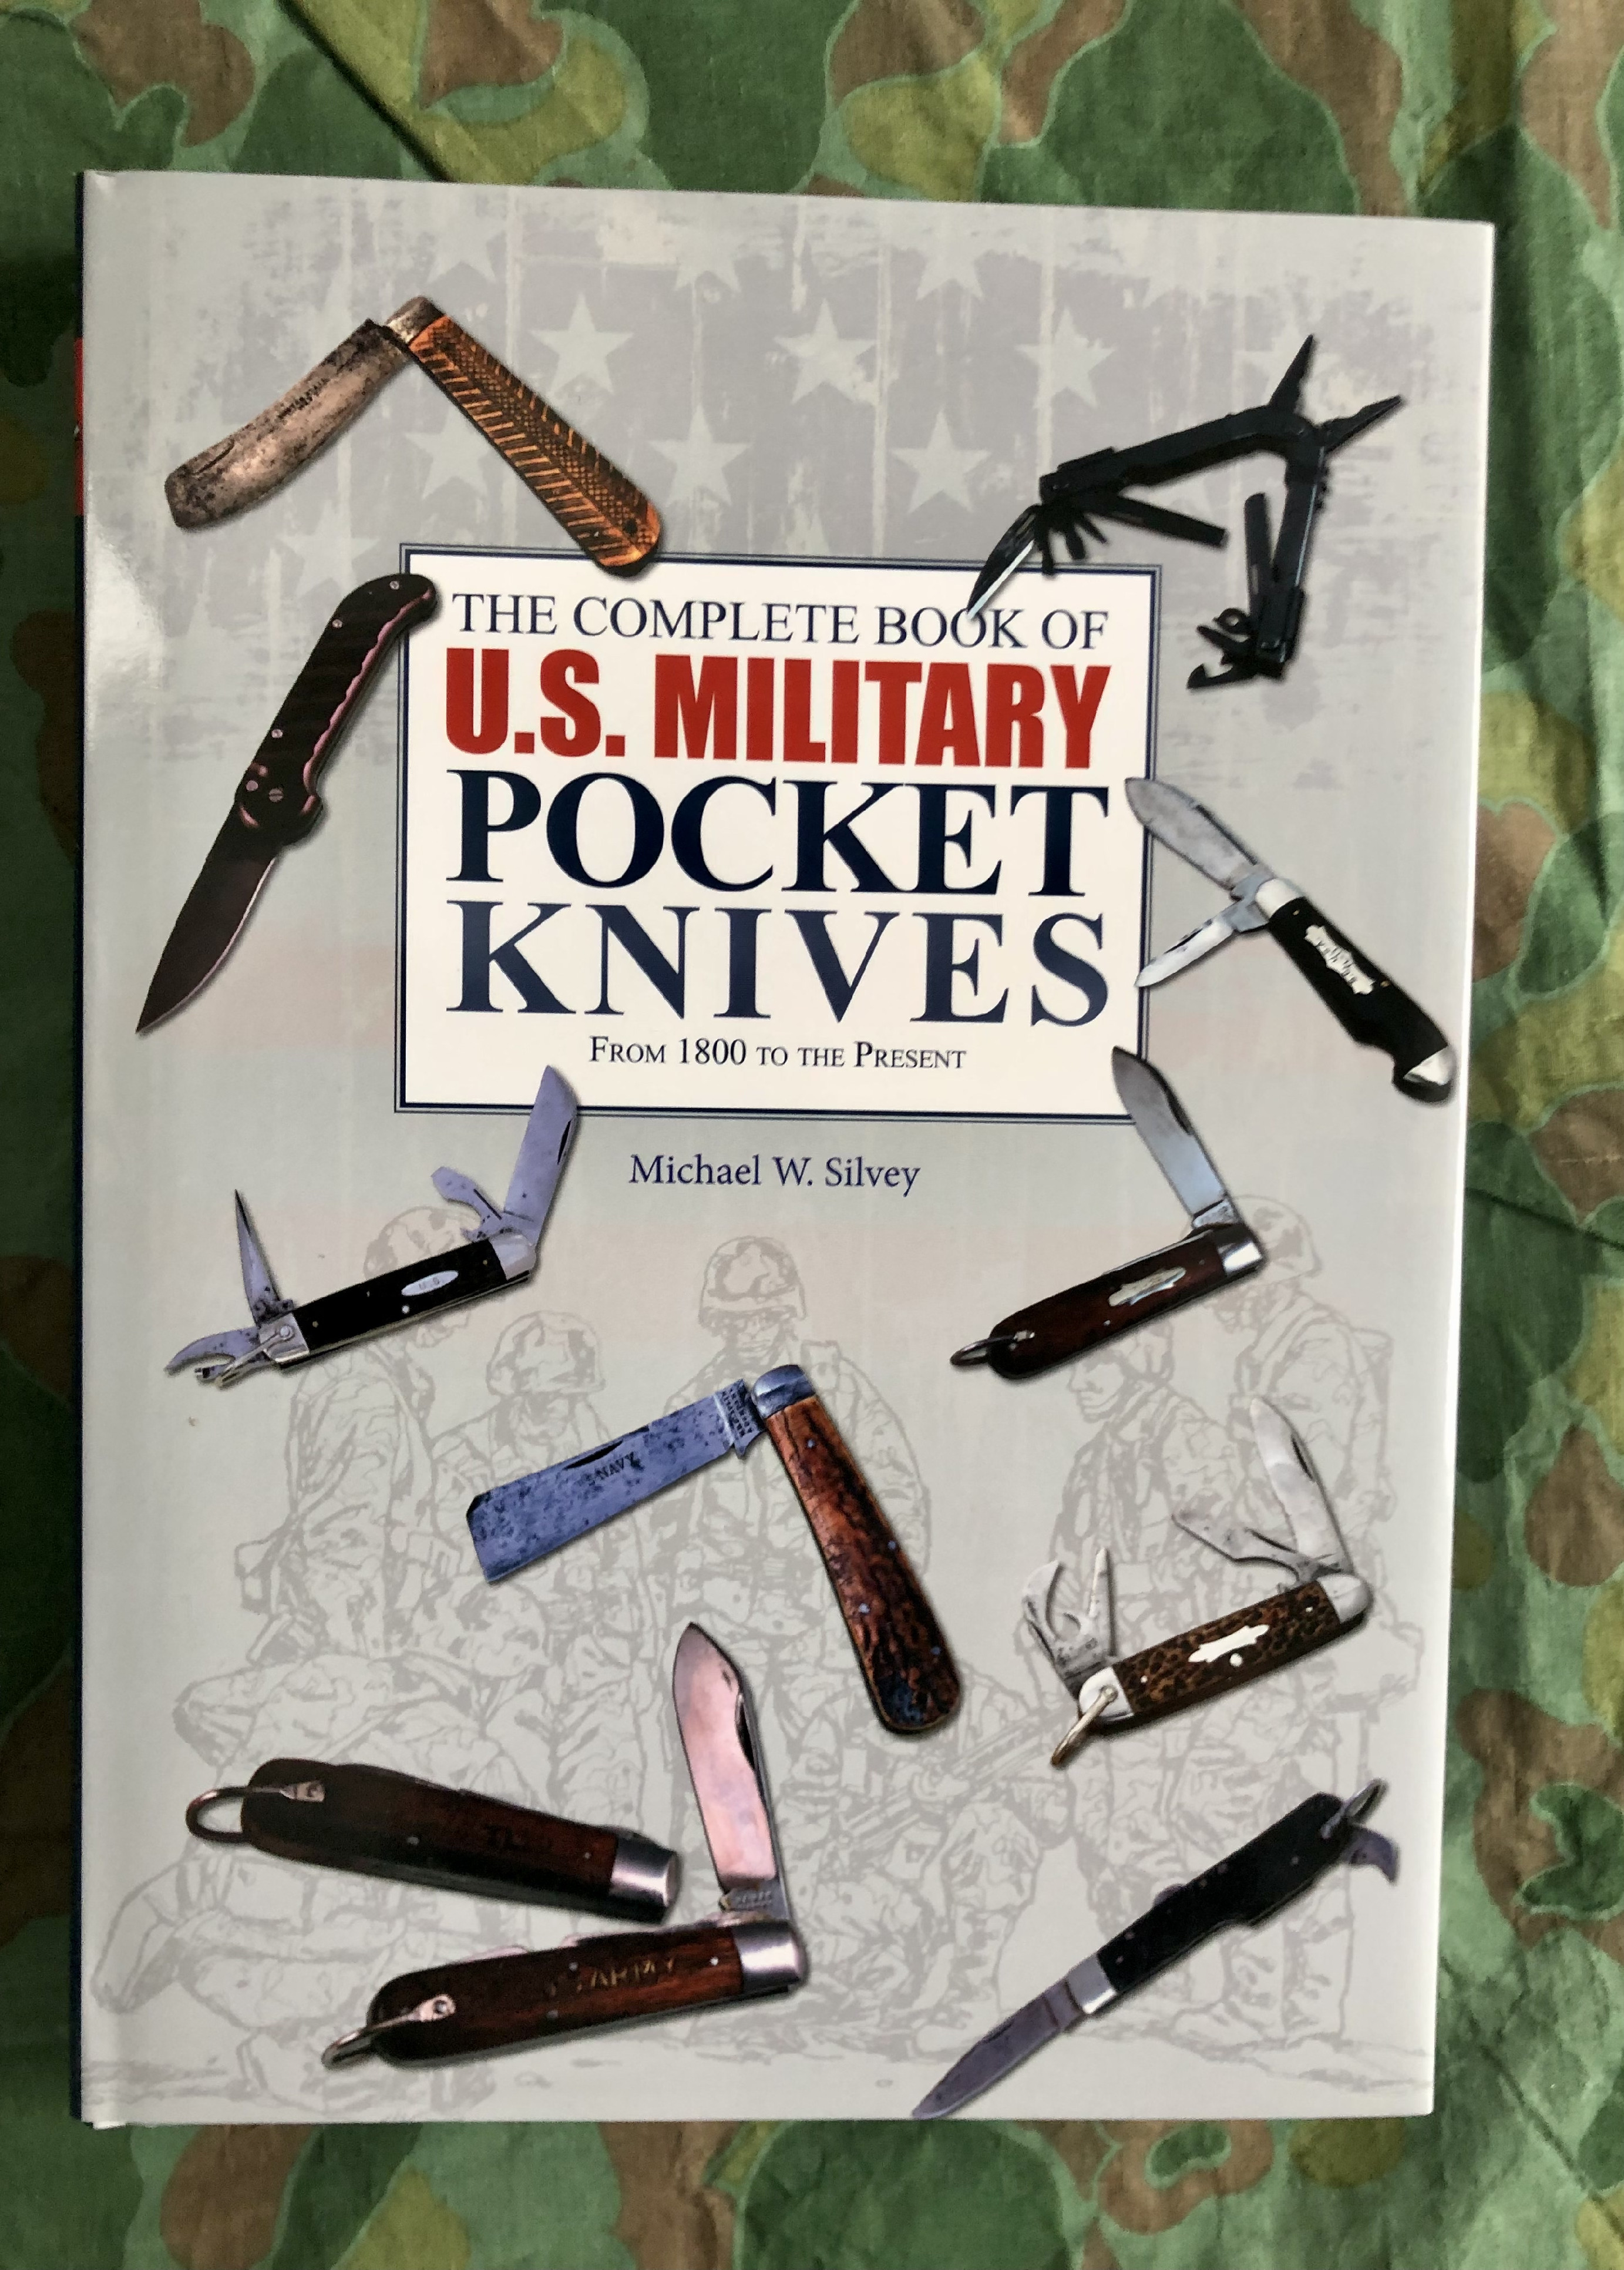 The Complete book of U.S. Military Pocket Knives